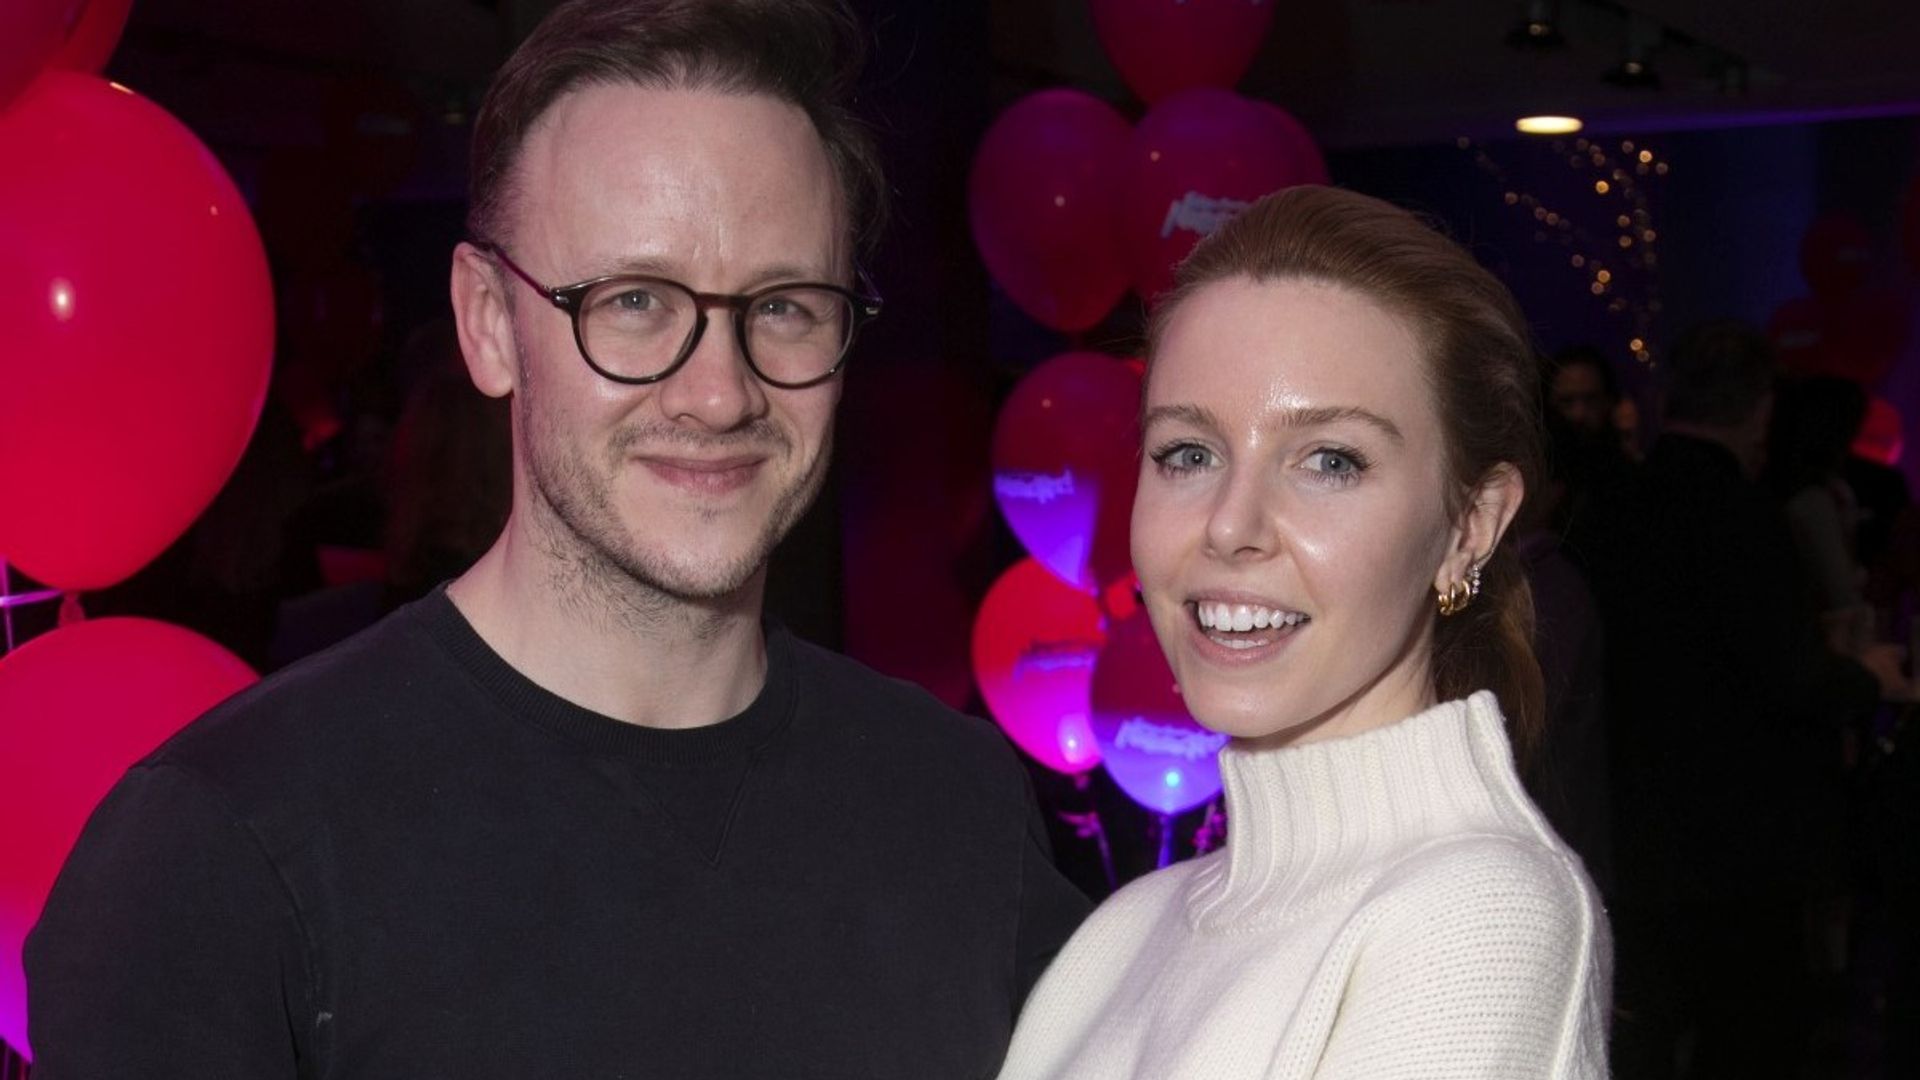 Kevin Clifton and Stacey Dooley at a party